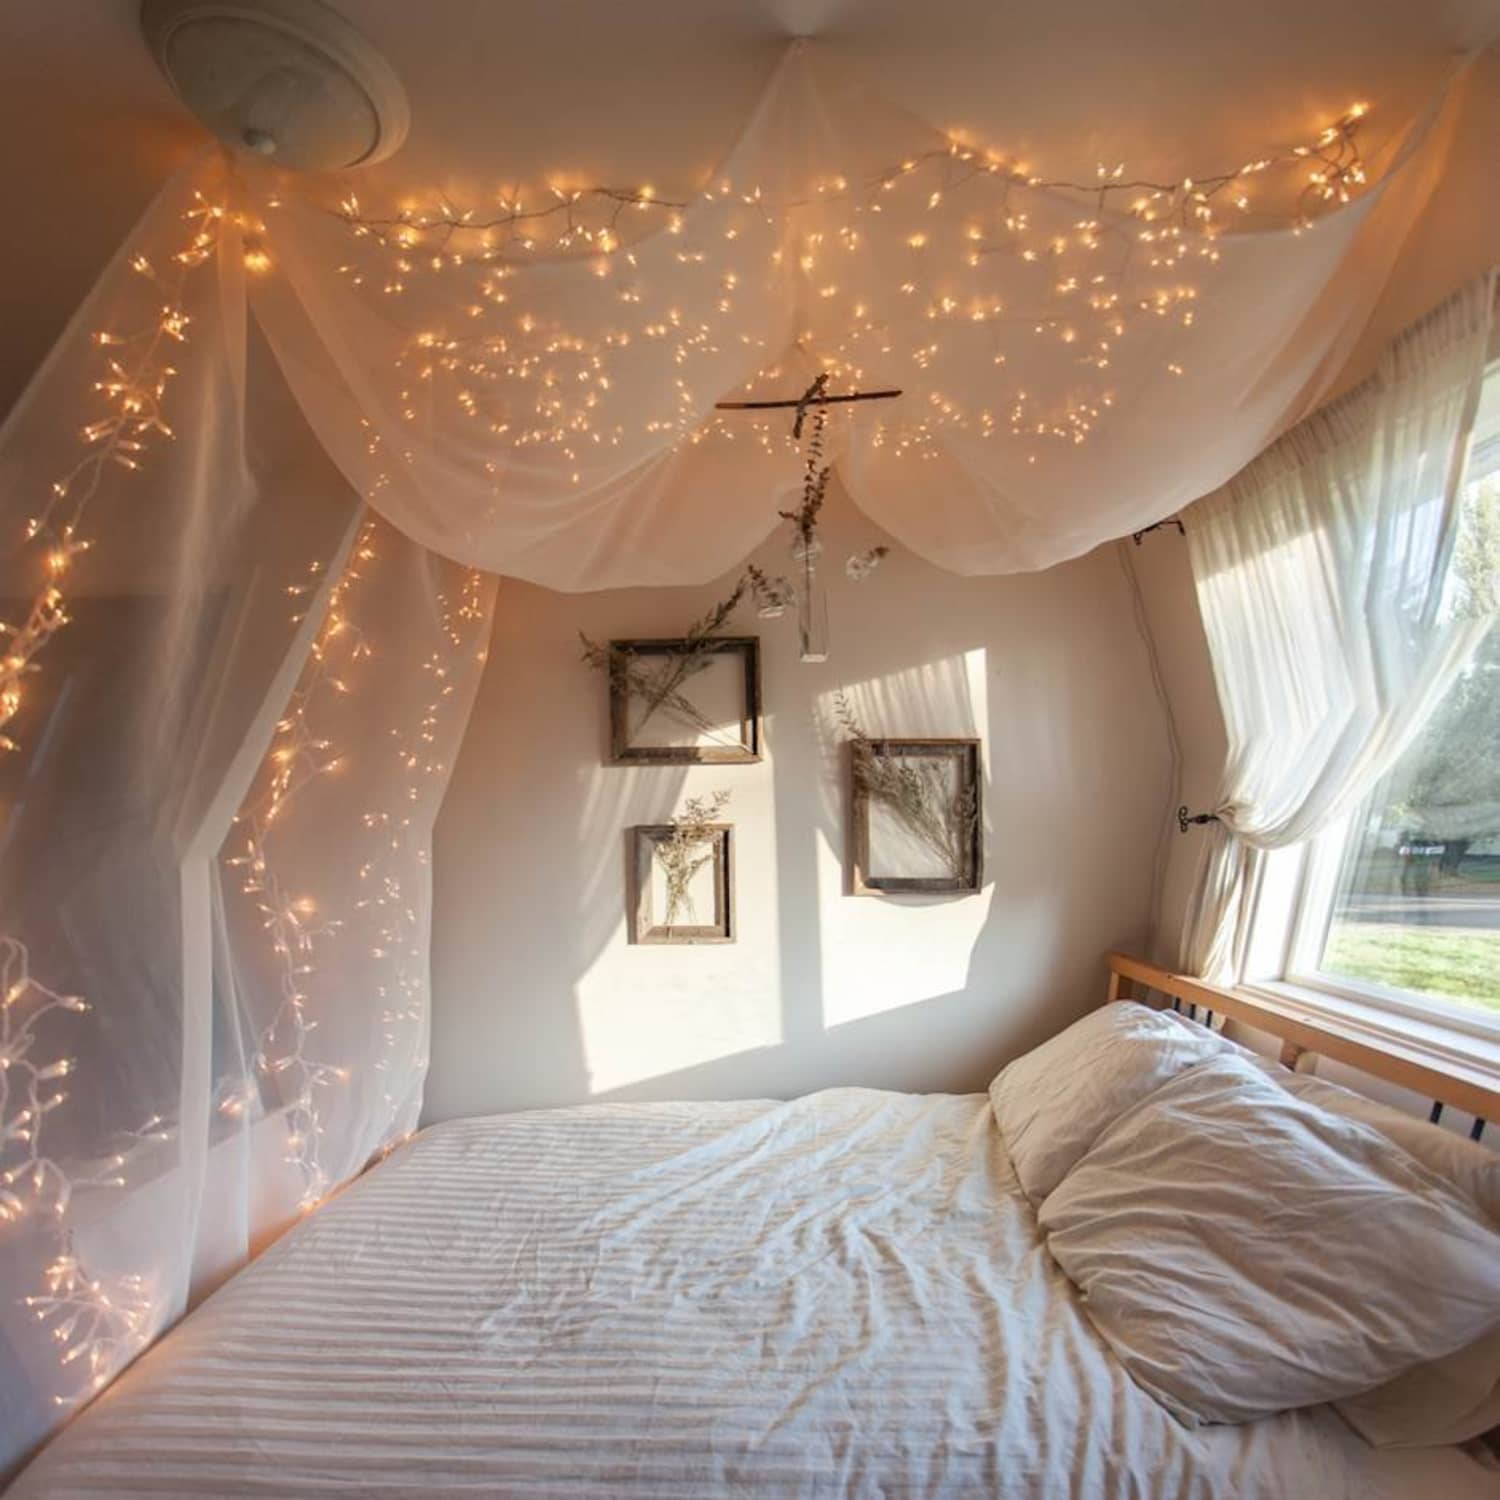 Nine Creative Ways to String Lights in Bedroom | Therapy